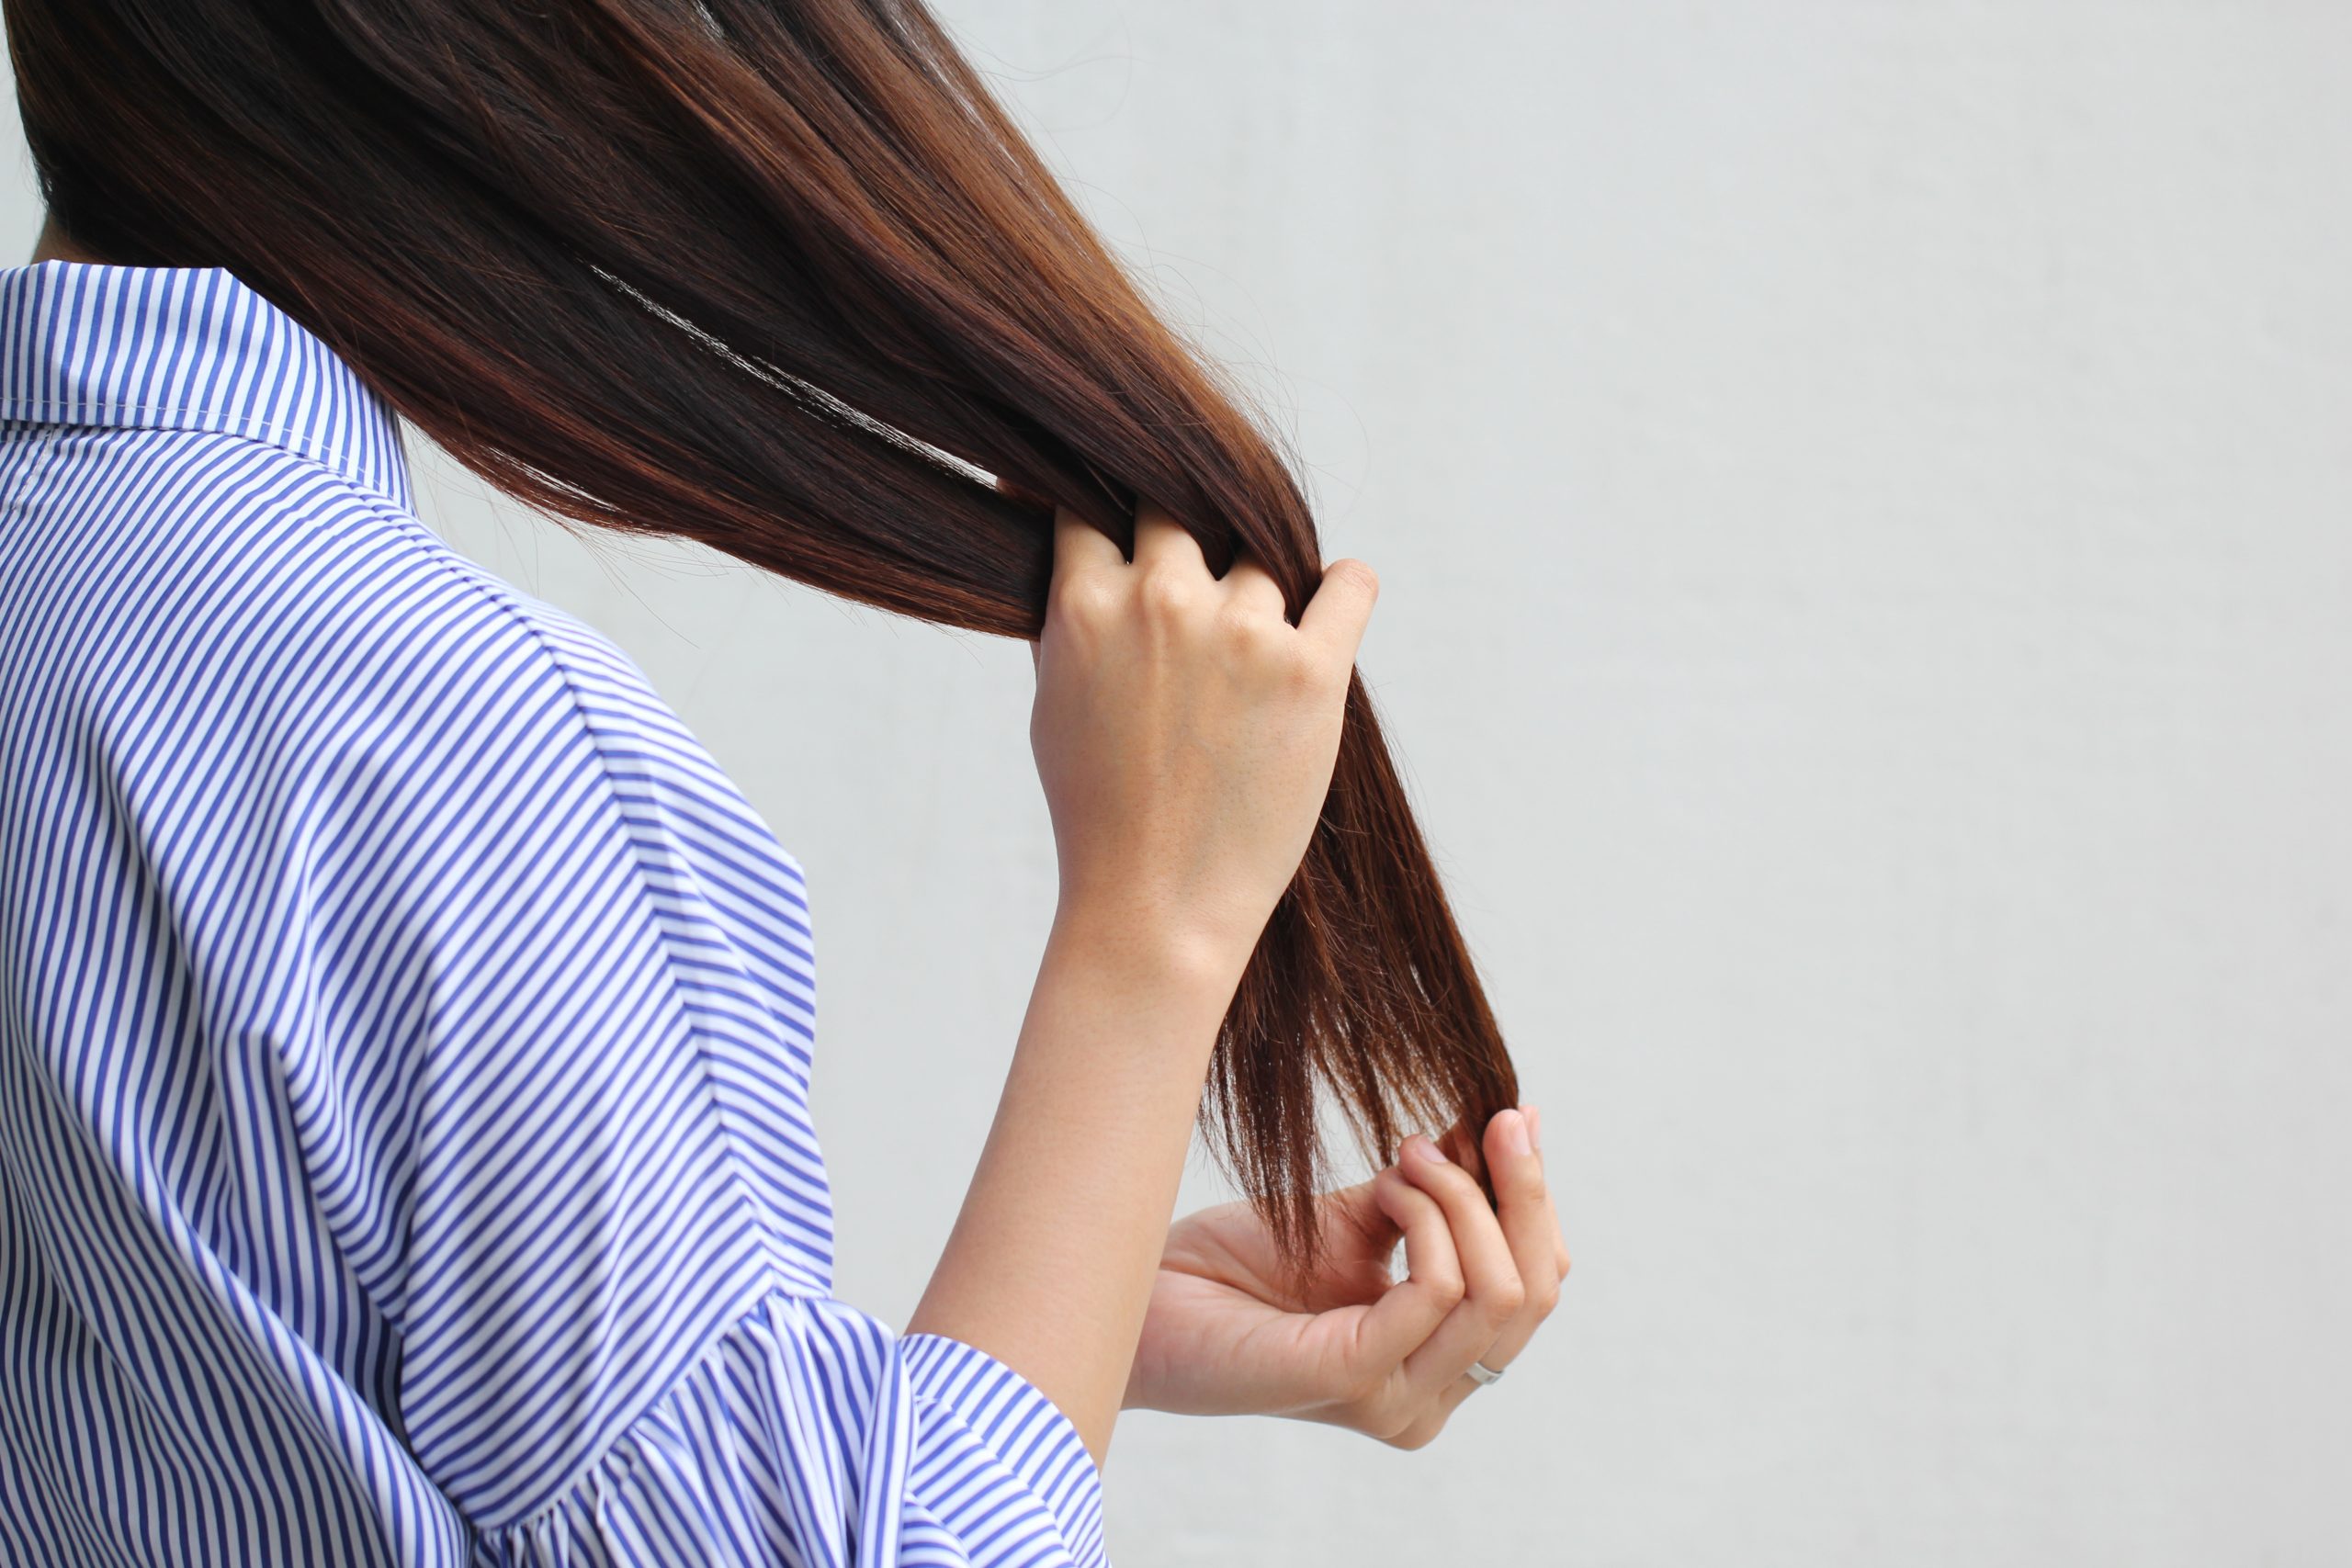 How to repair or fix dry damaged hair